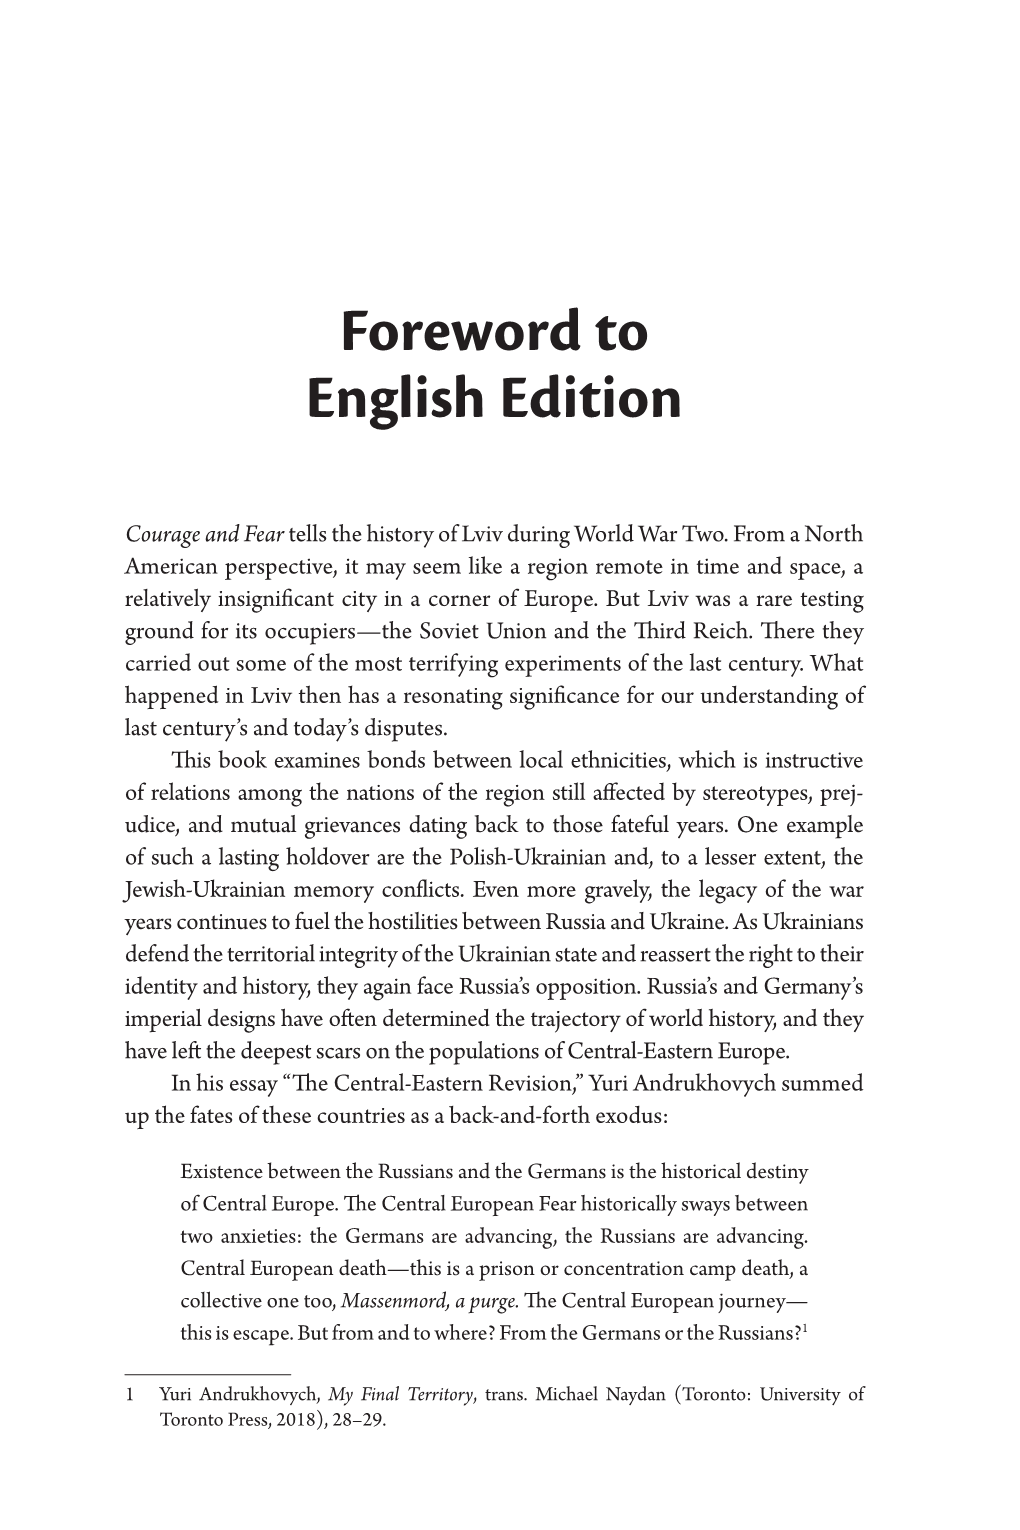 Foreword to English Edition